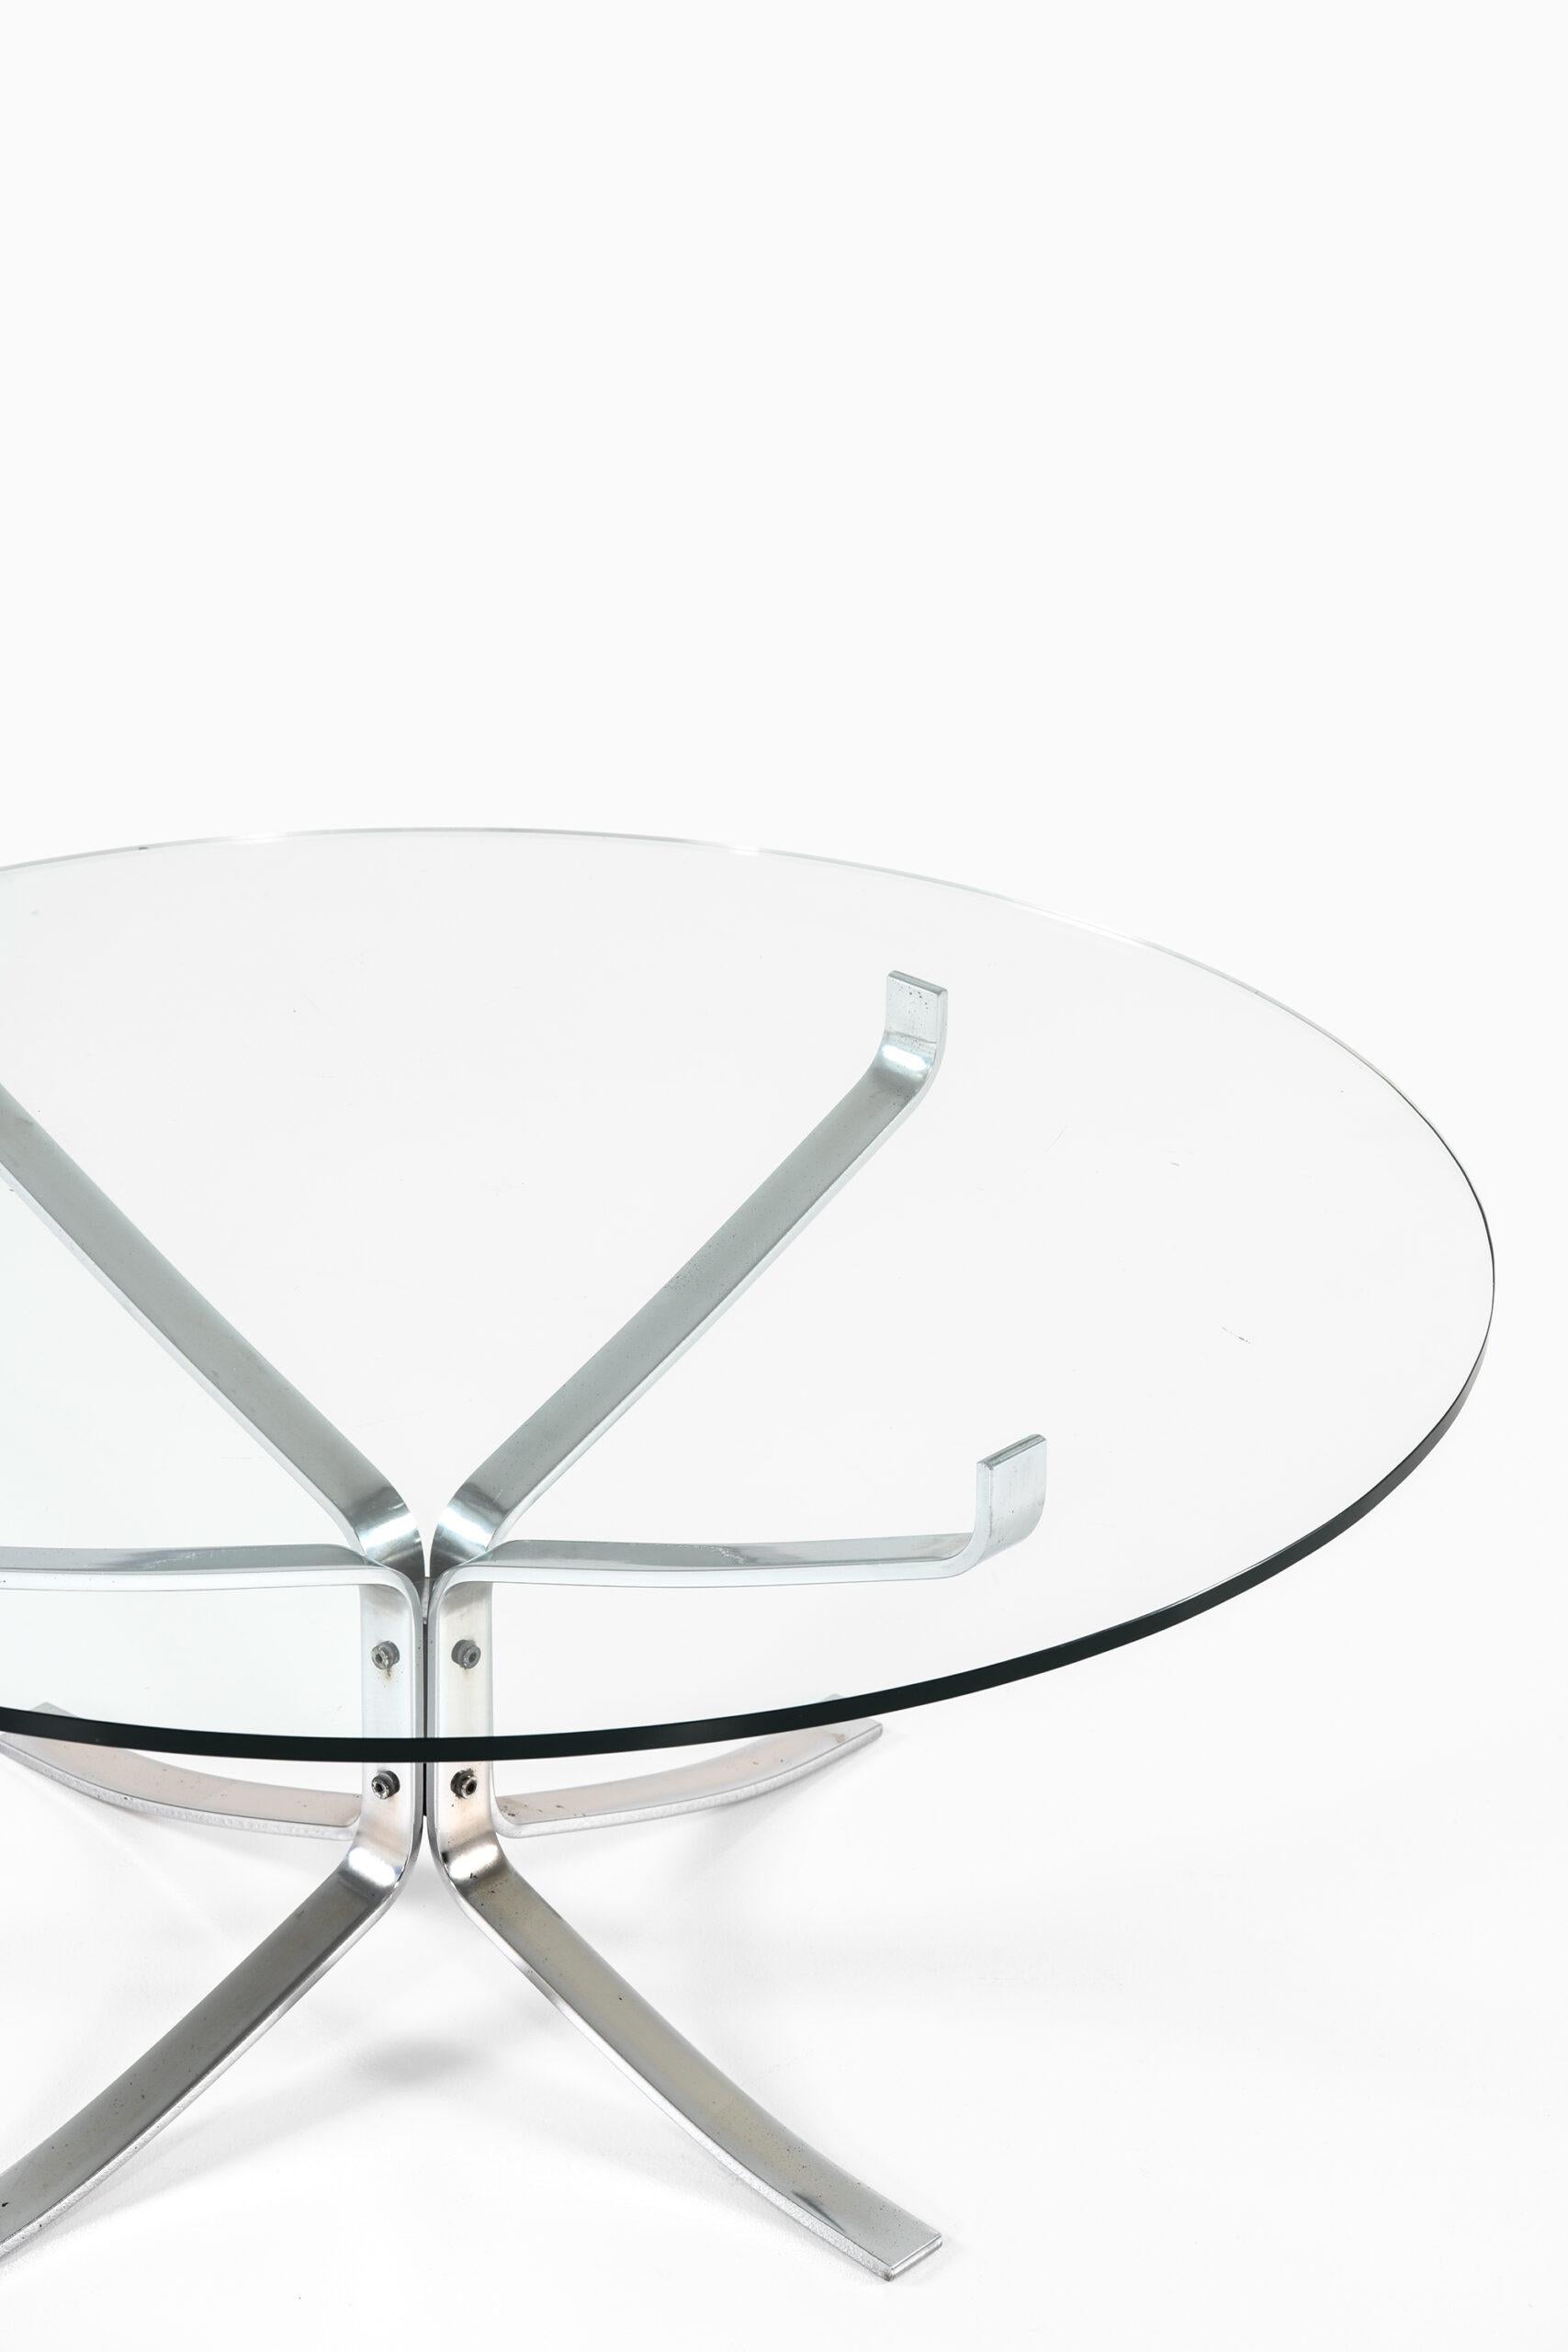 Scandinavian Modern Sigurd Resell Coffee Table Produced by Vatne Möbler in Norway For Sale